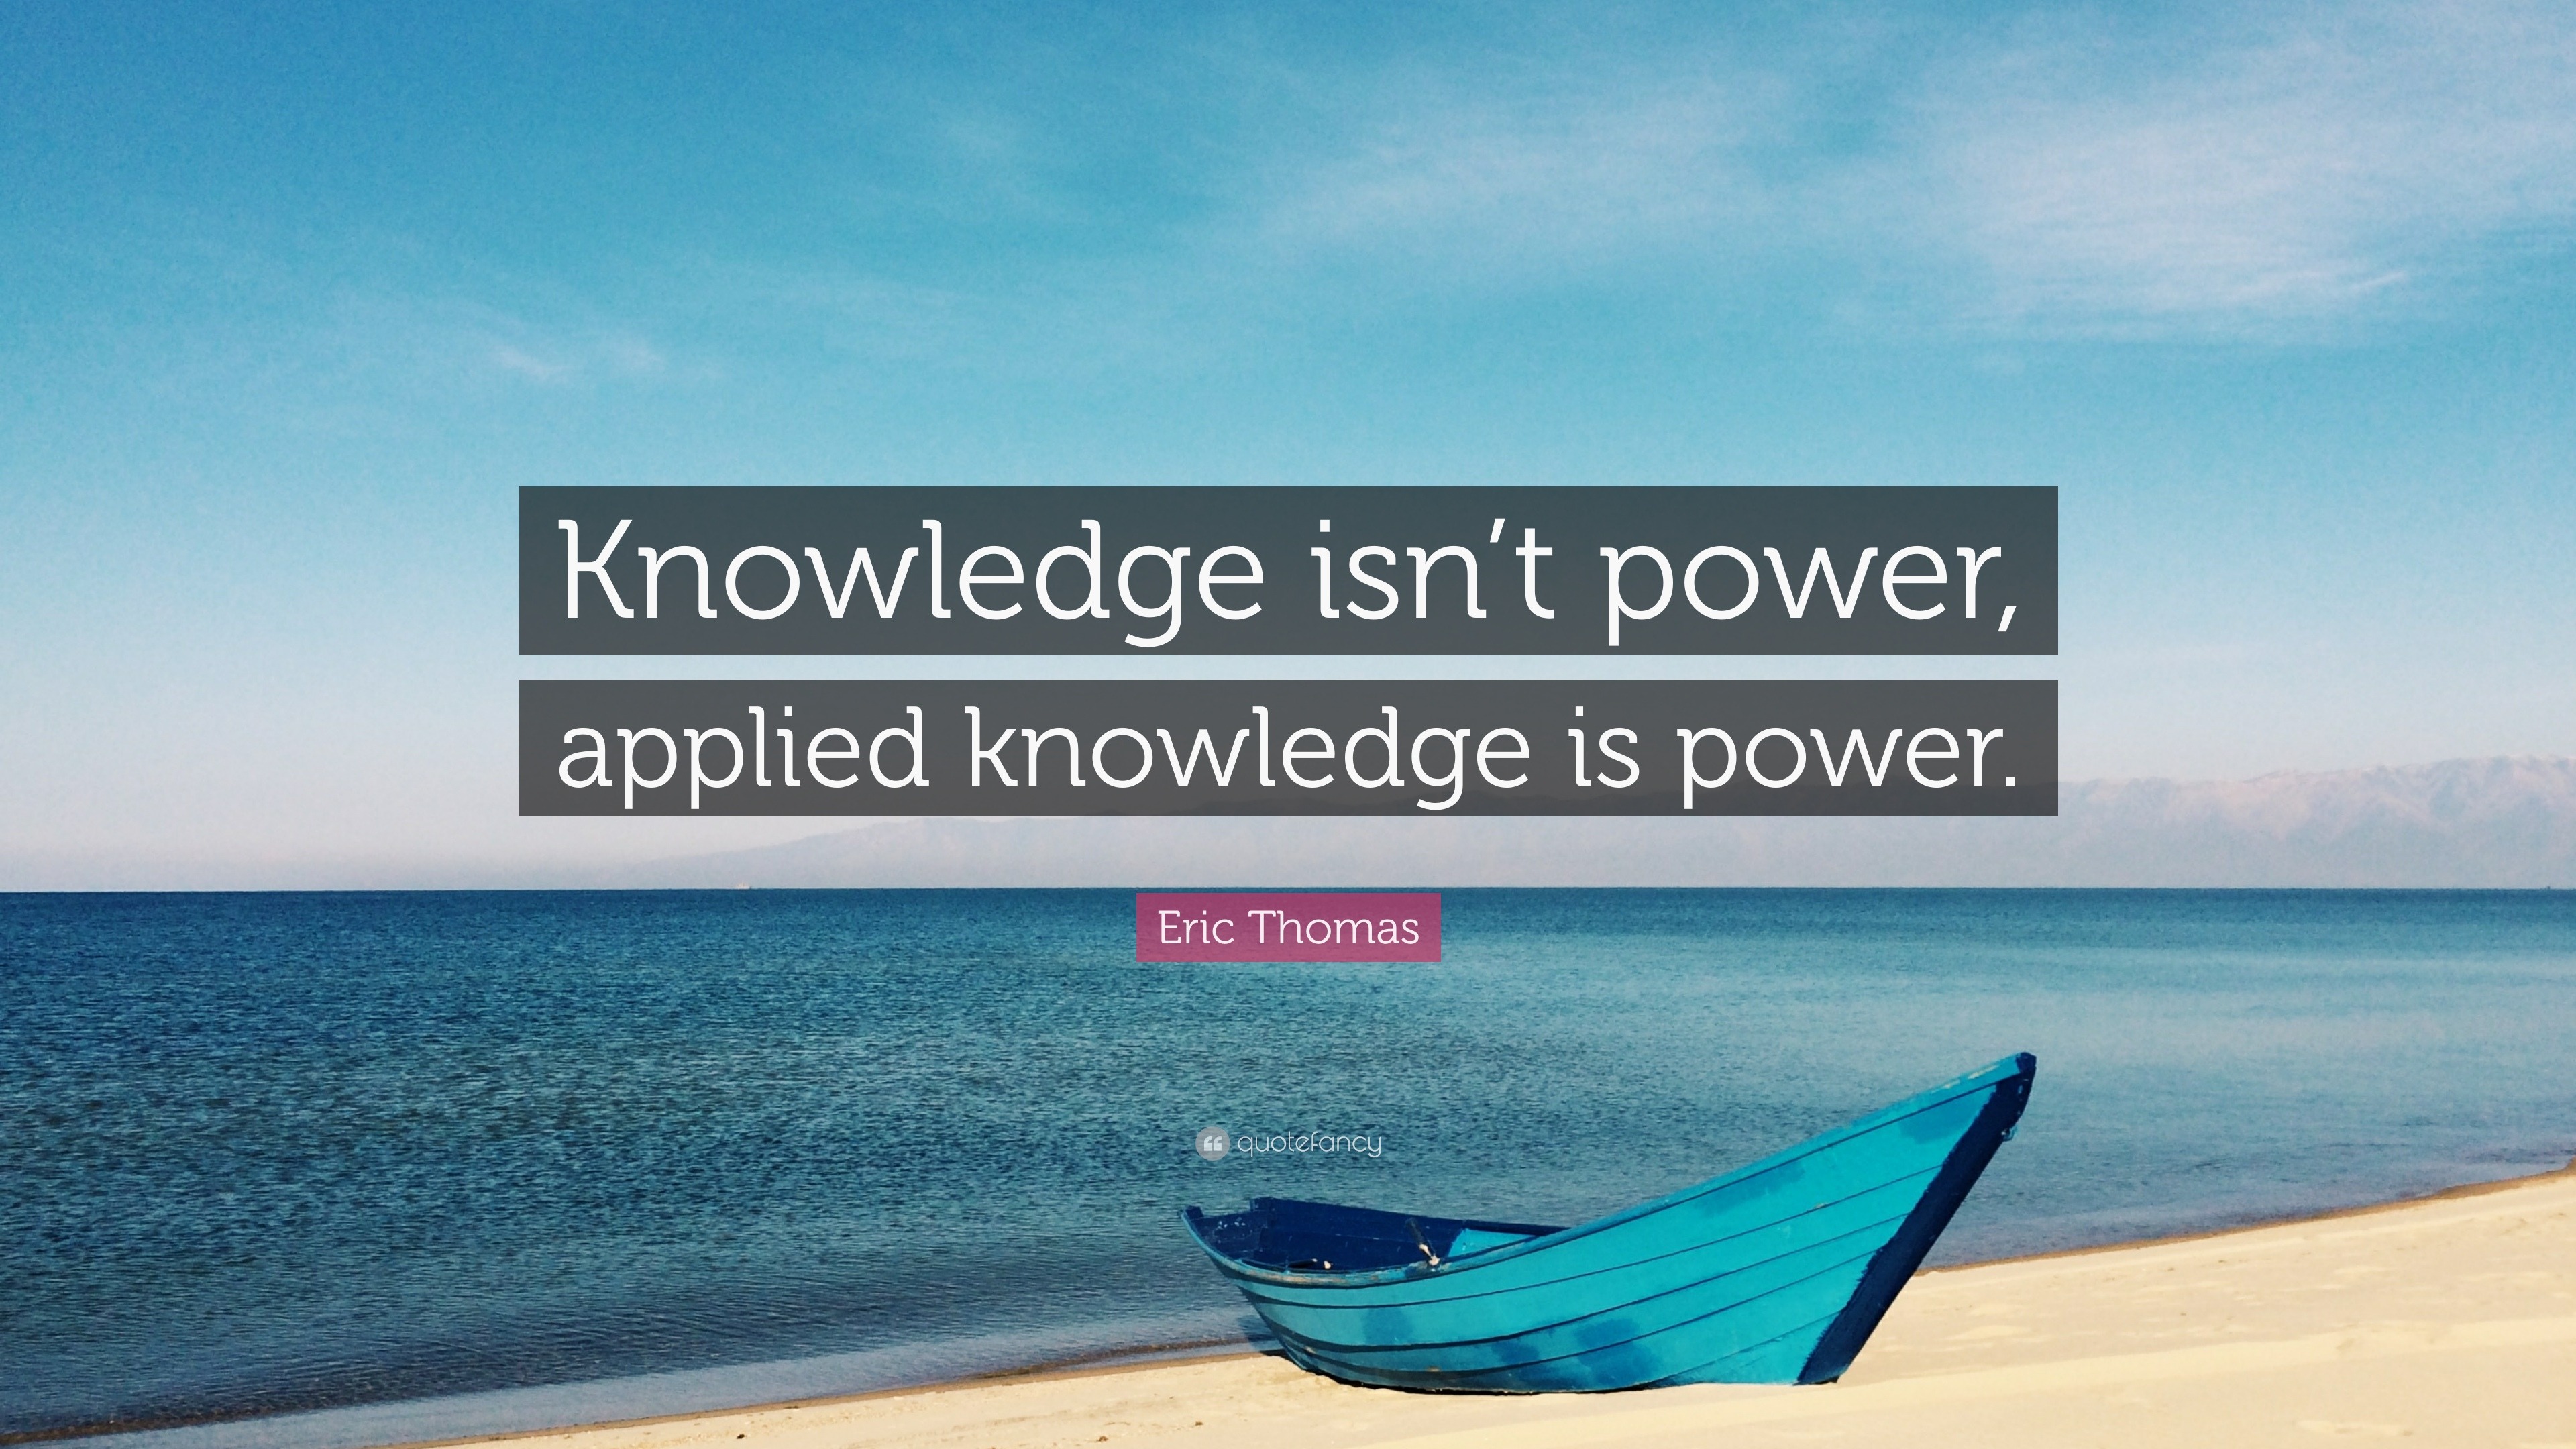 what is knowledge power